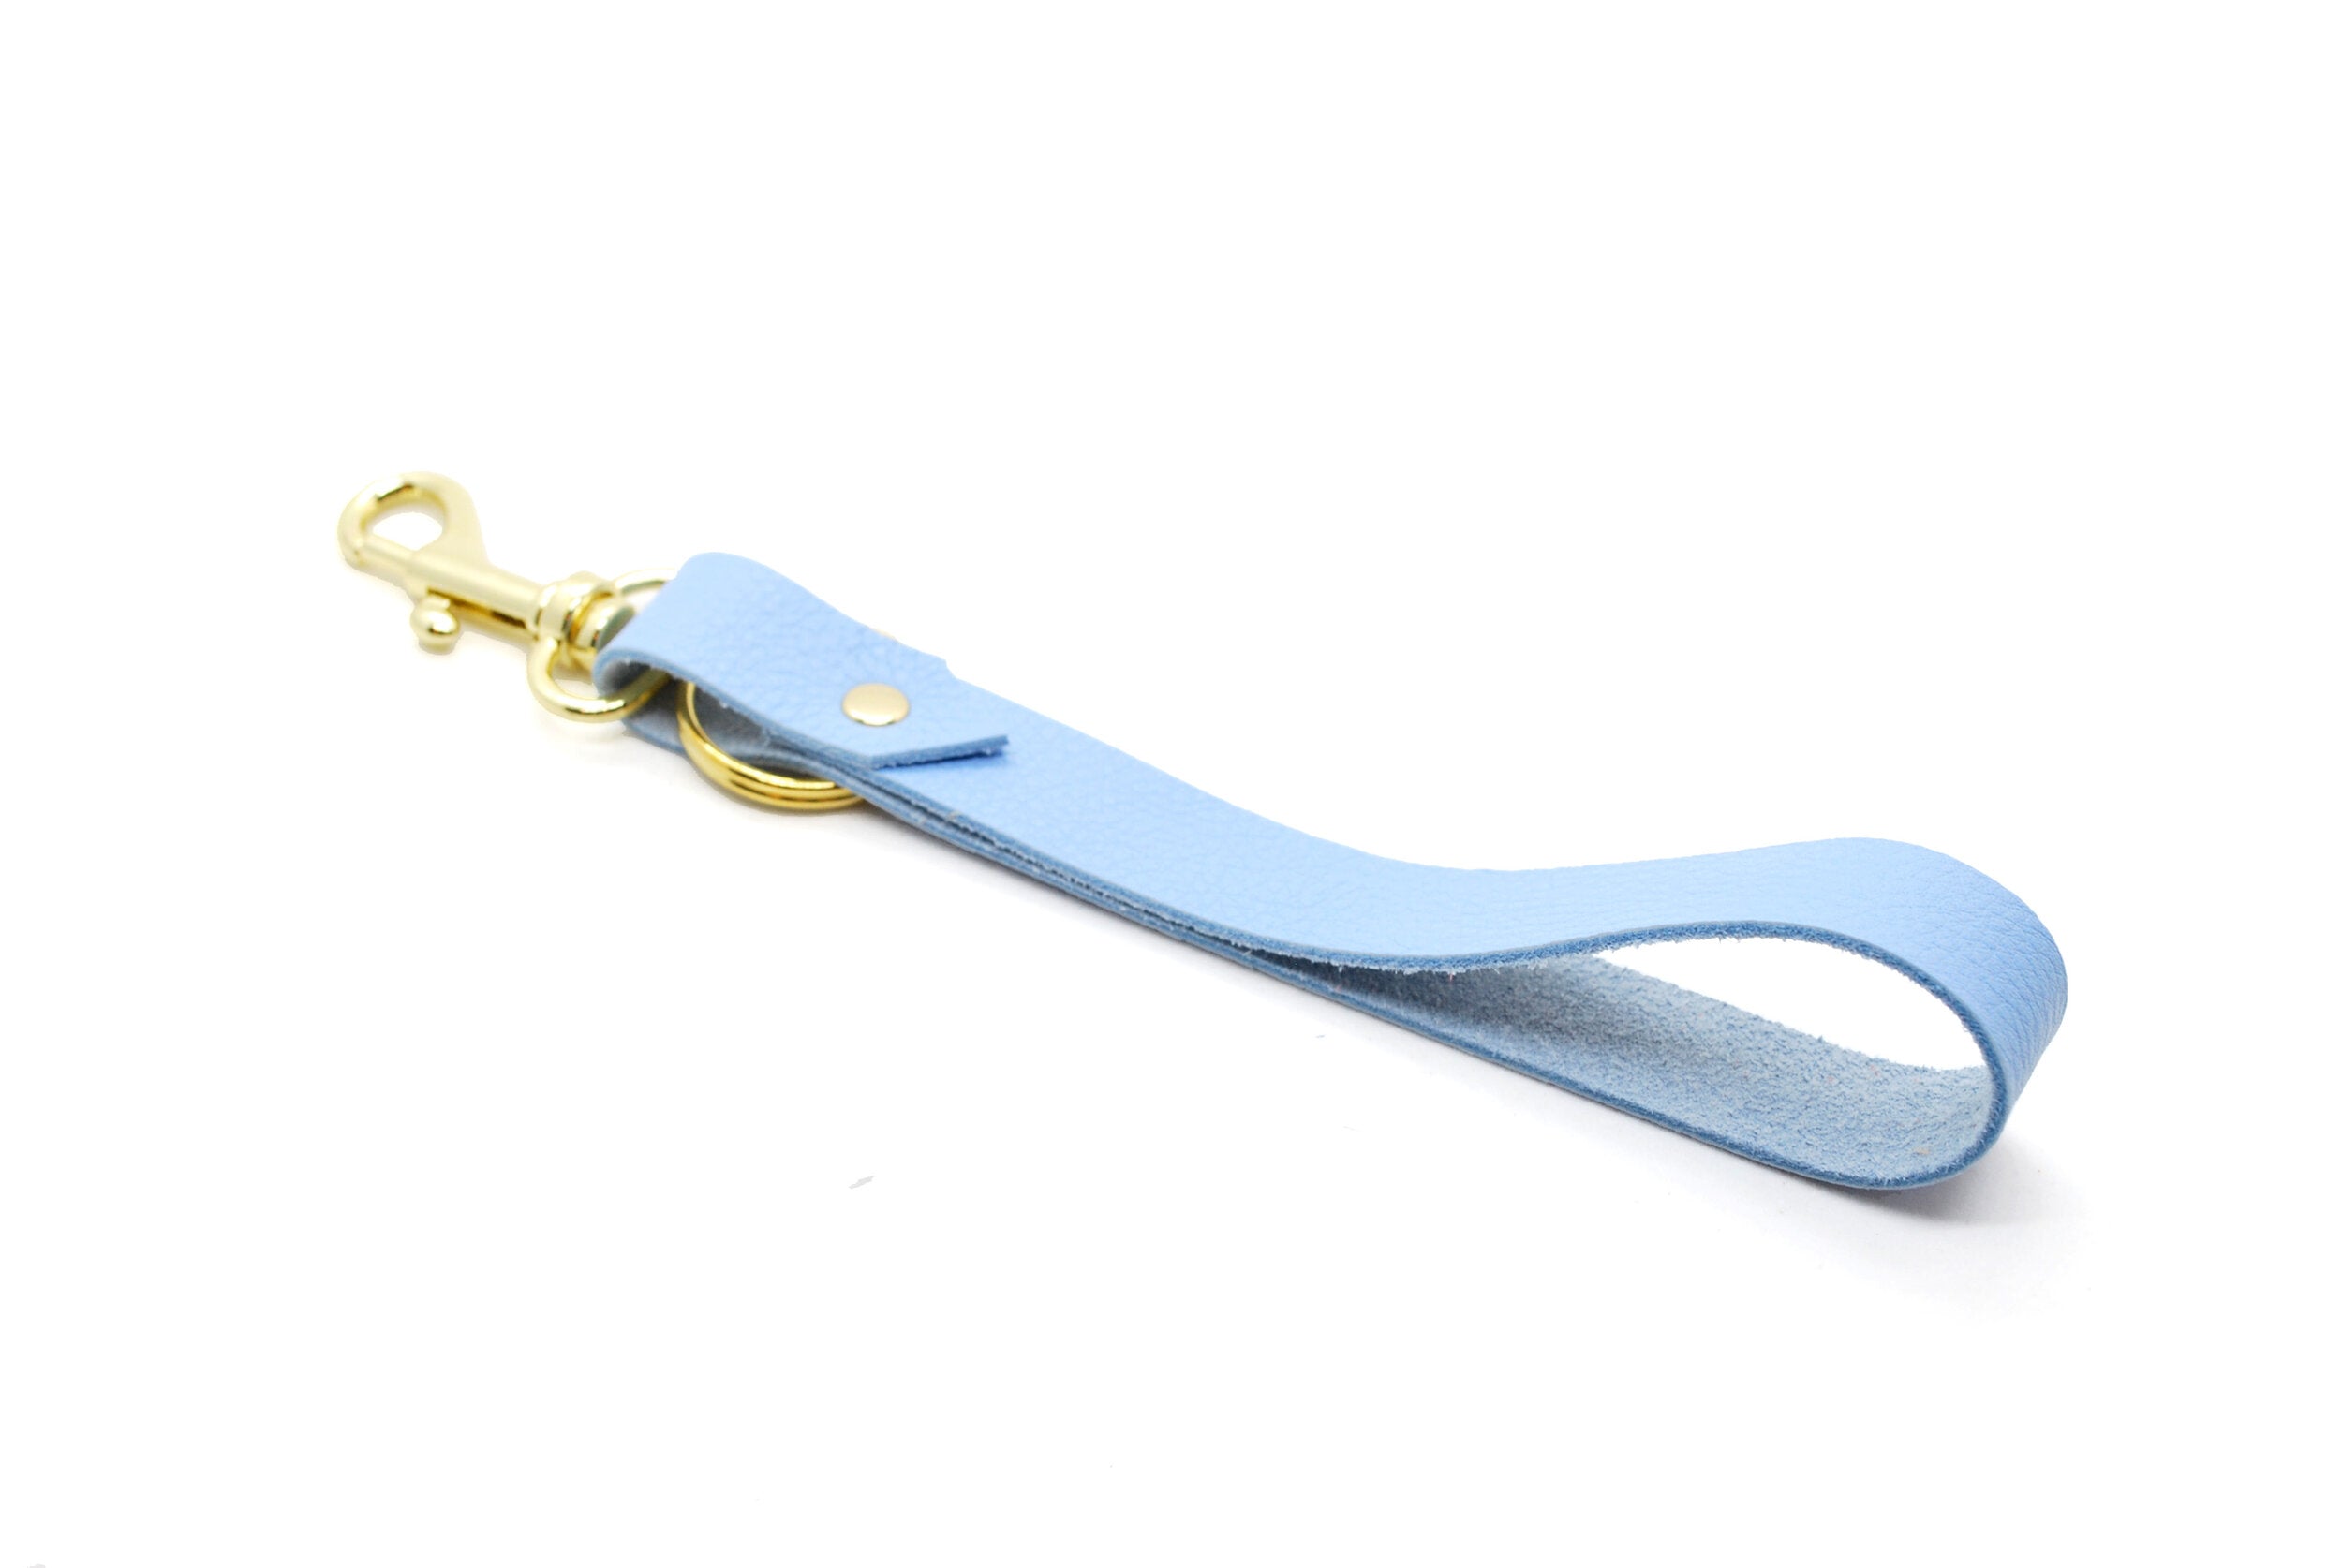 soft leather key fob wristlet in pastel periwinkle blue.